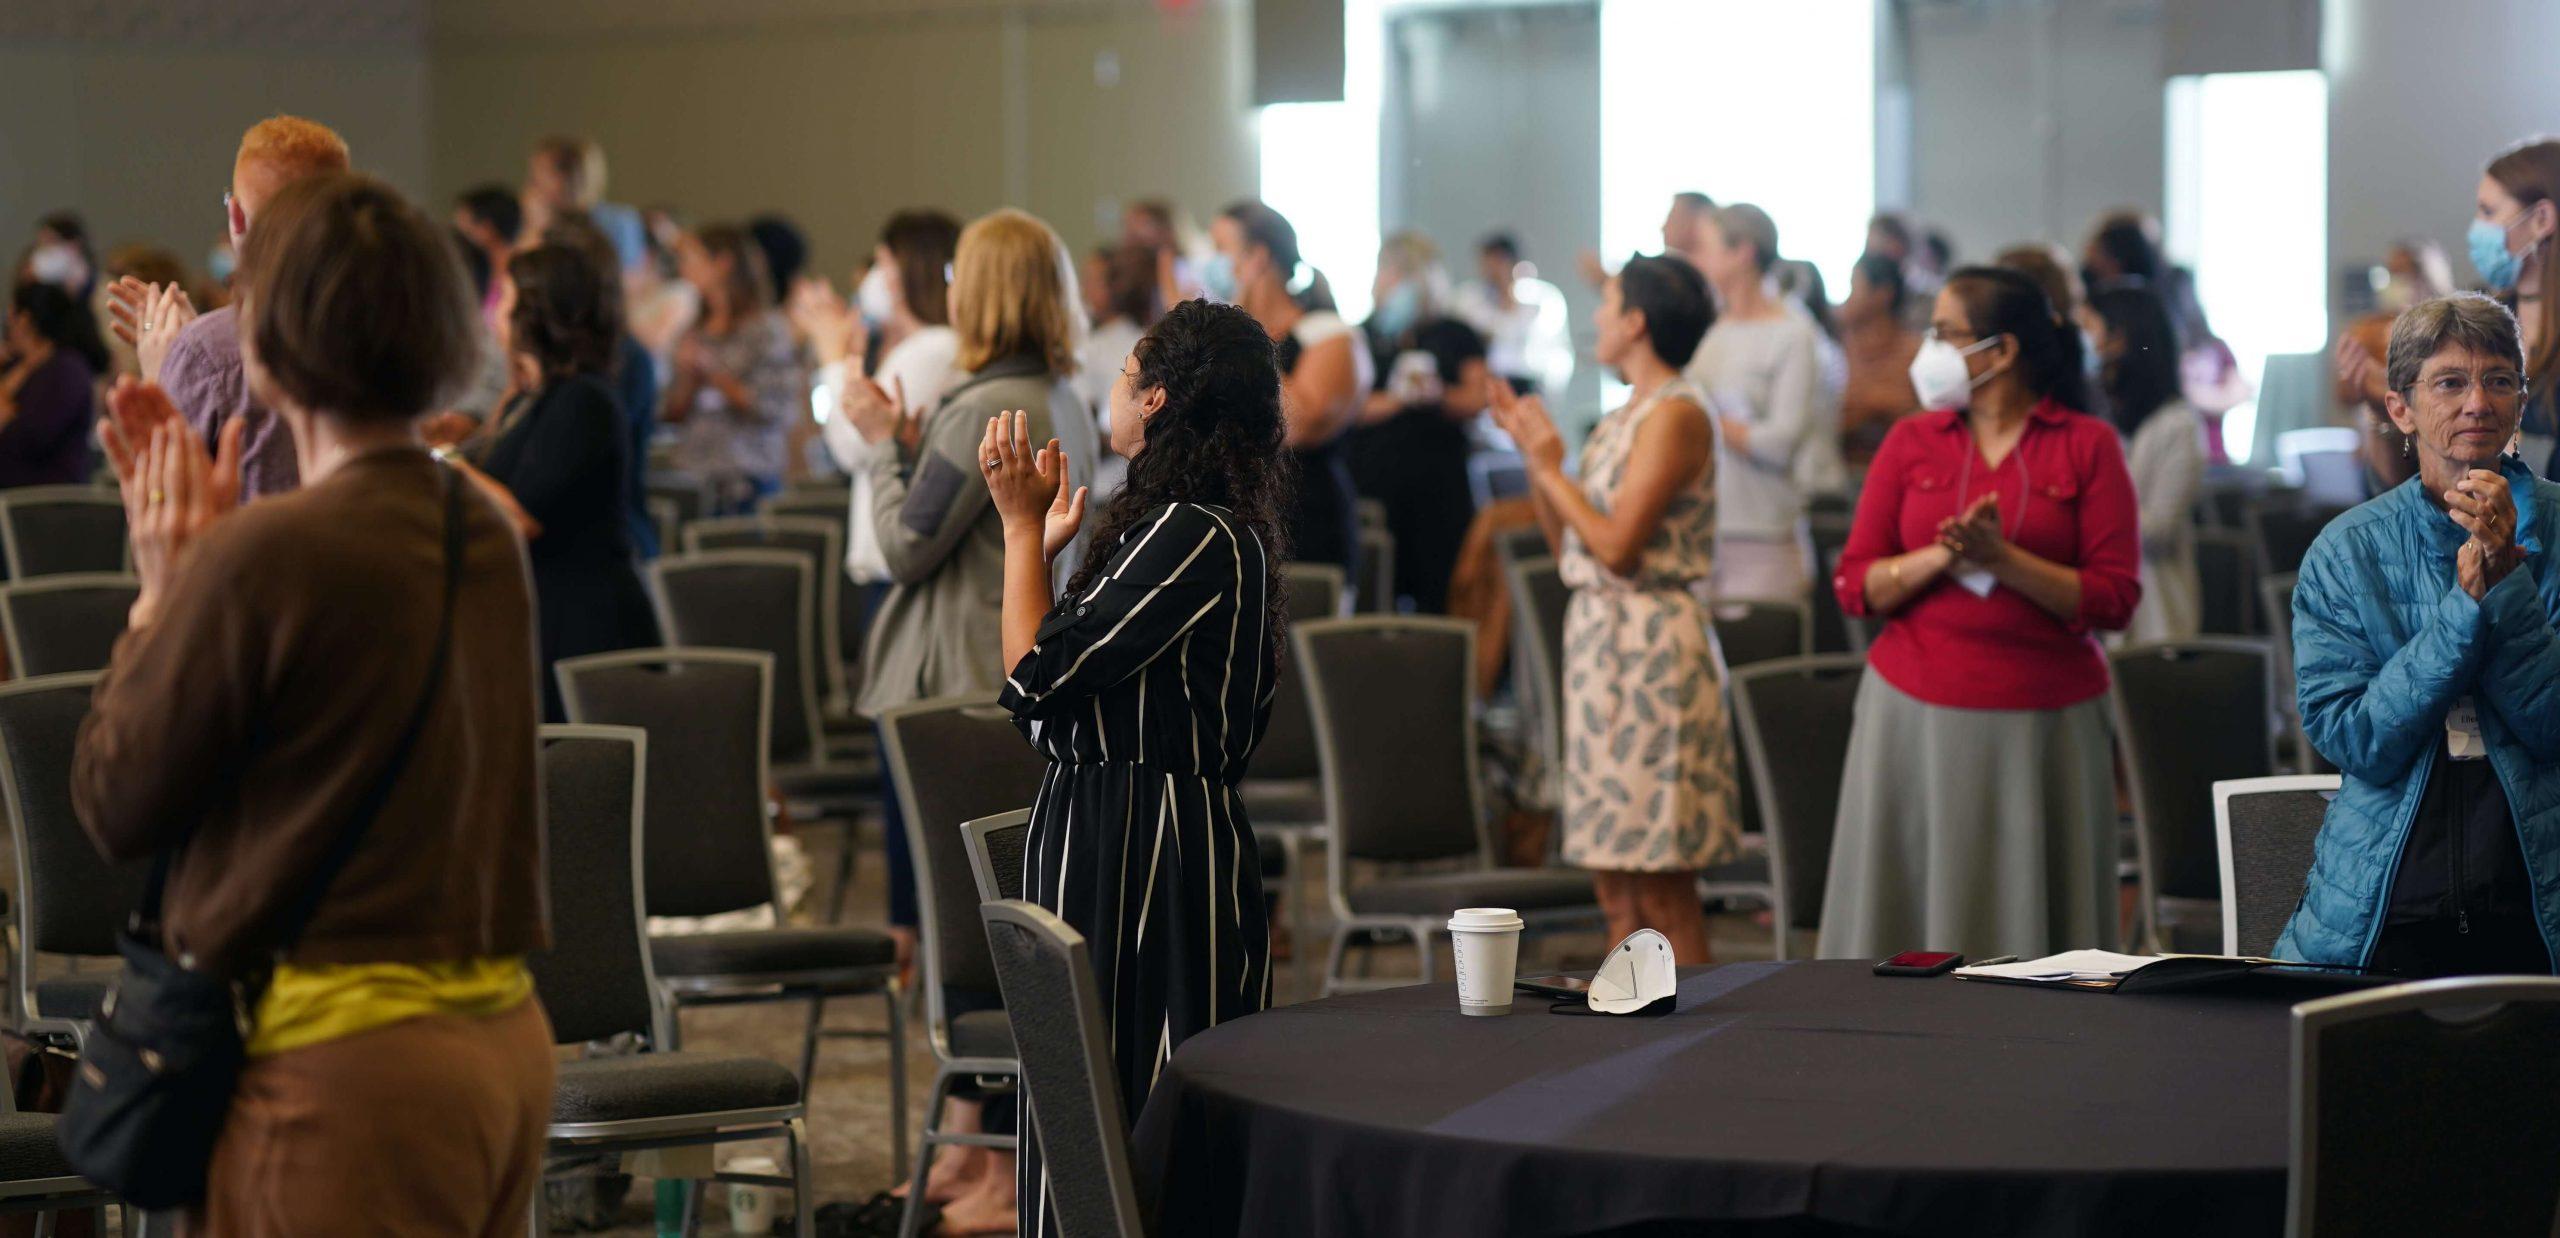 audience clapping at a conference